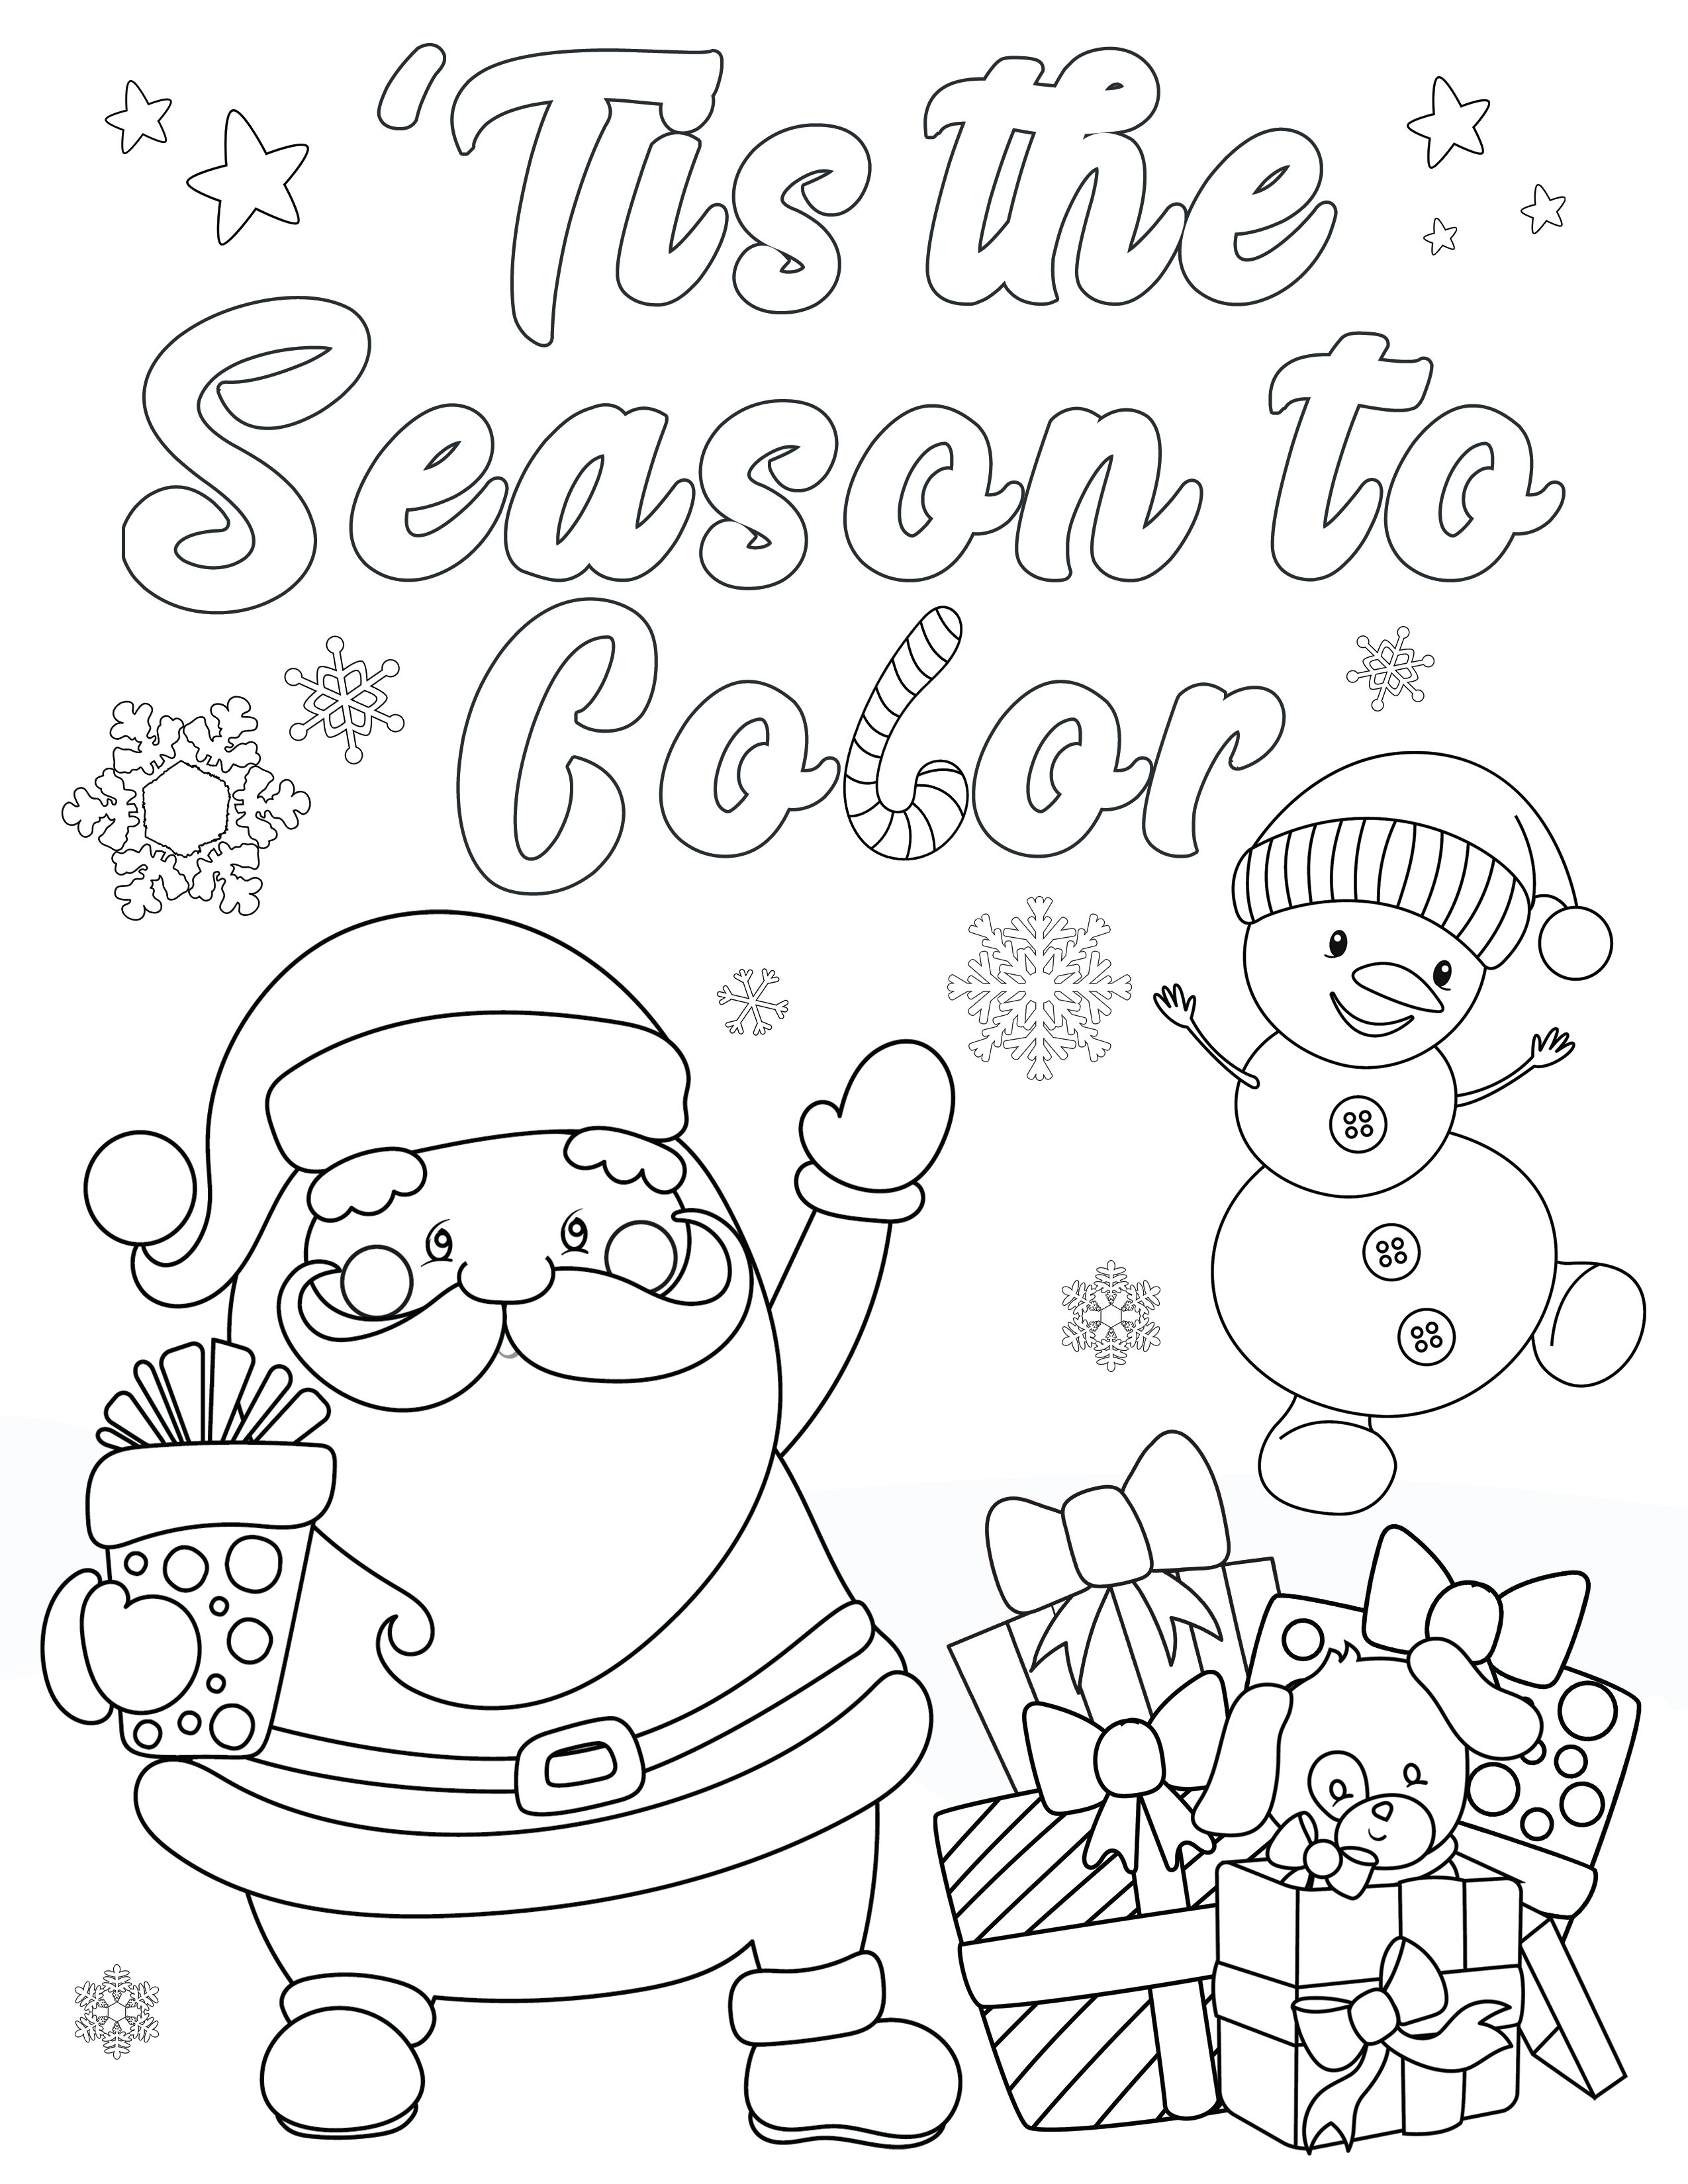 Christmas Coloring Pages To Print Sketch Coloring Page